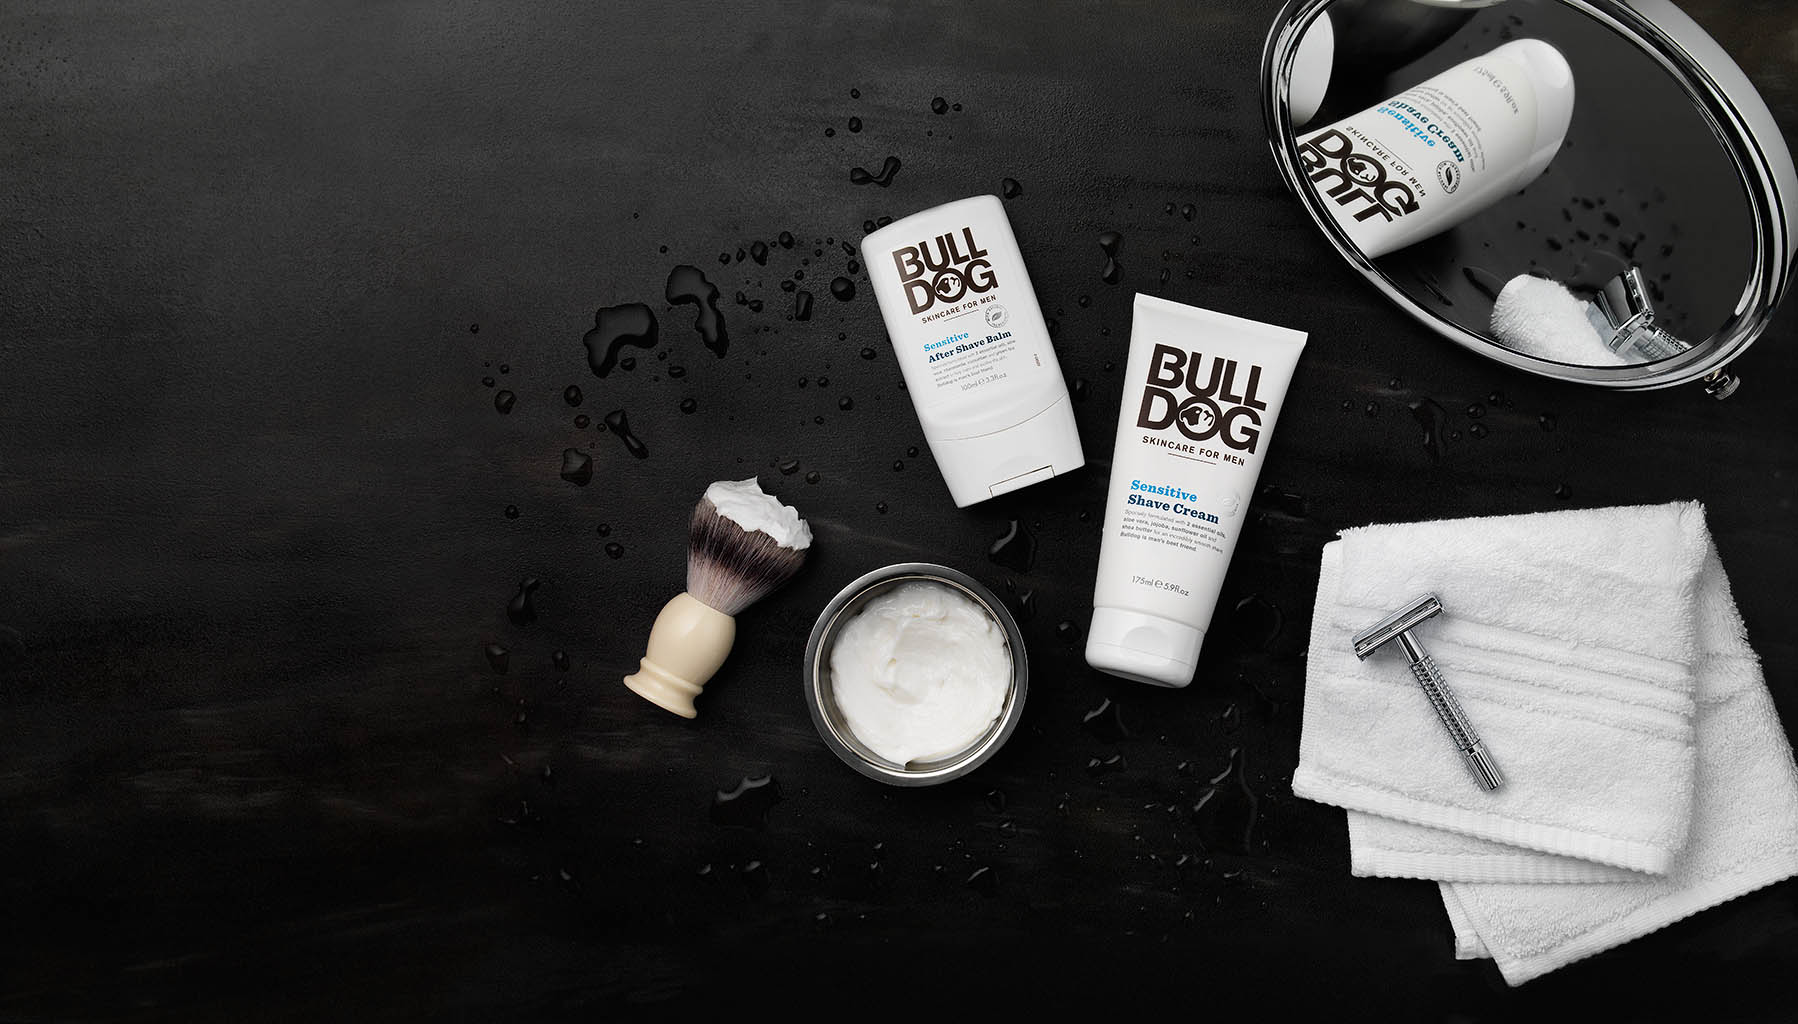 Cosmetics Photography of Bull Dog men grooming products by Packshot Factory